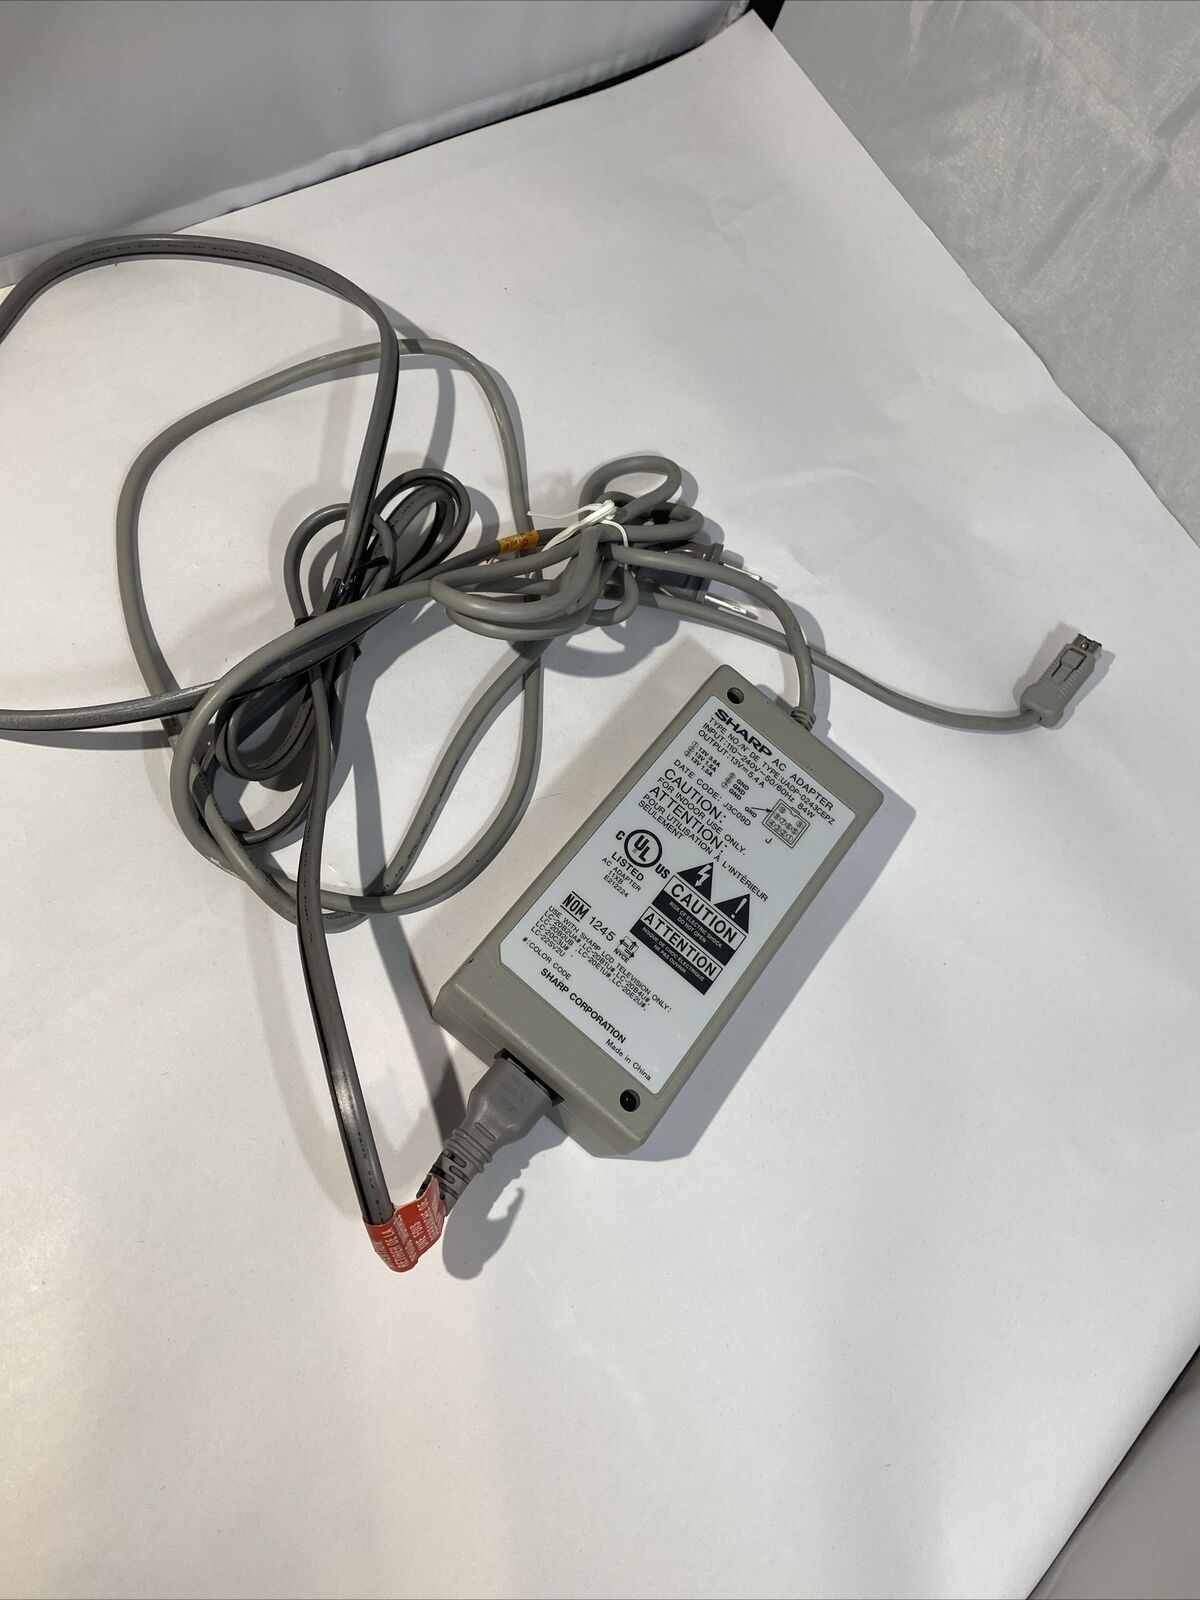 Sharp AC Adapter UADP-0243CEPZ 13V 5.4A Power Supply For LC-20 Series TVs TESTED